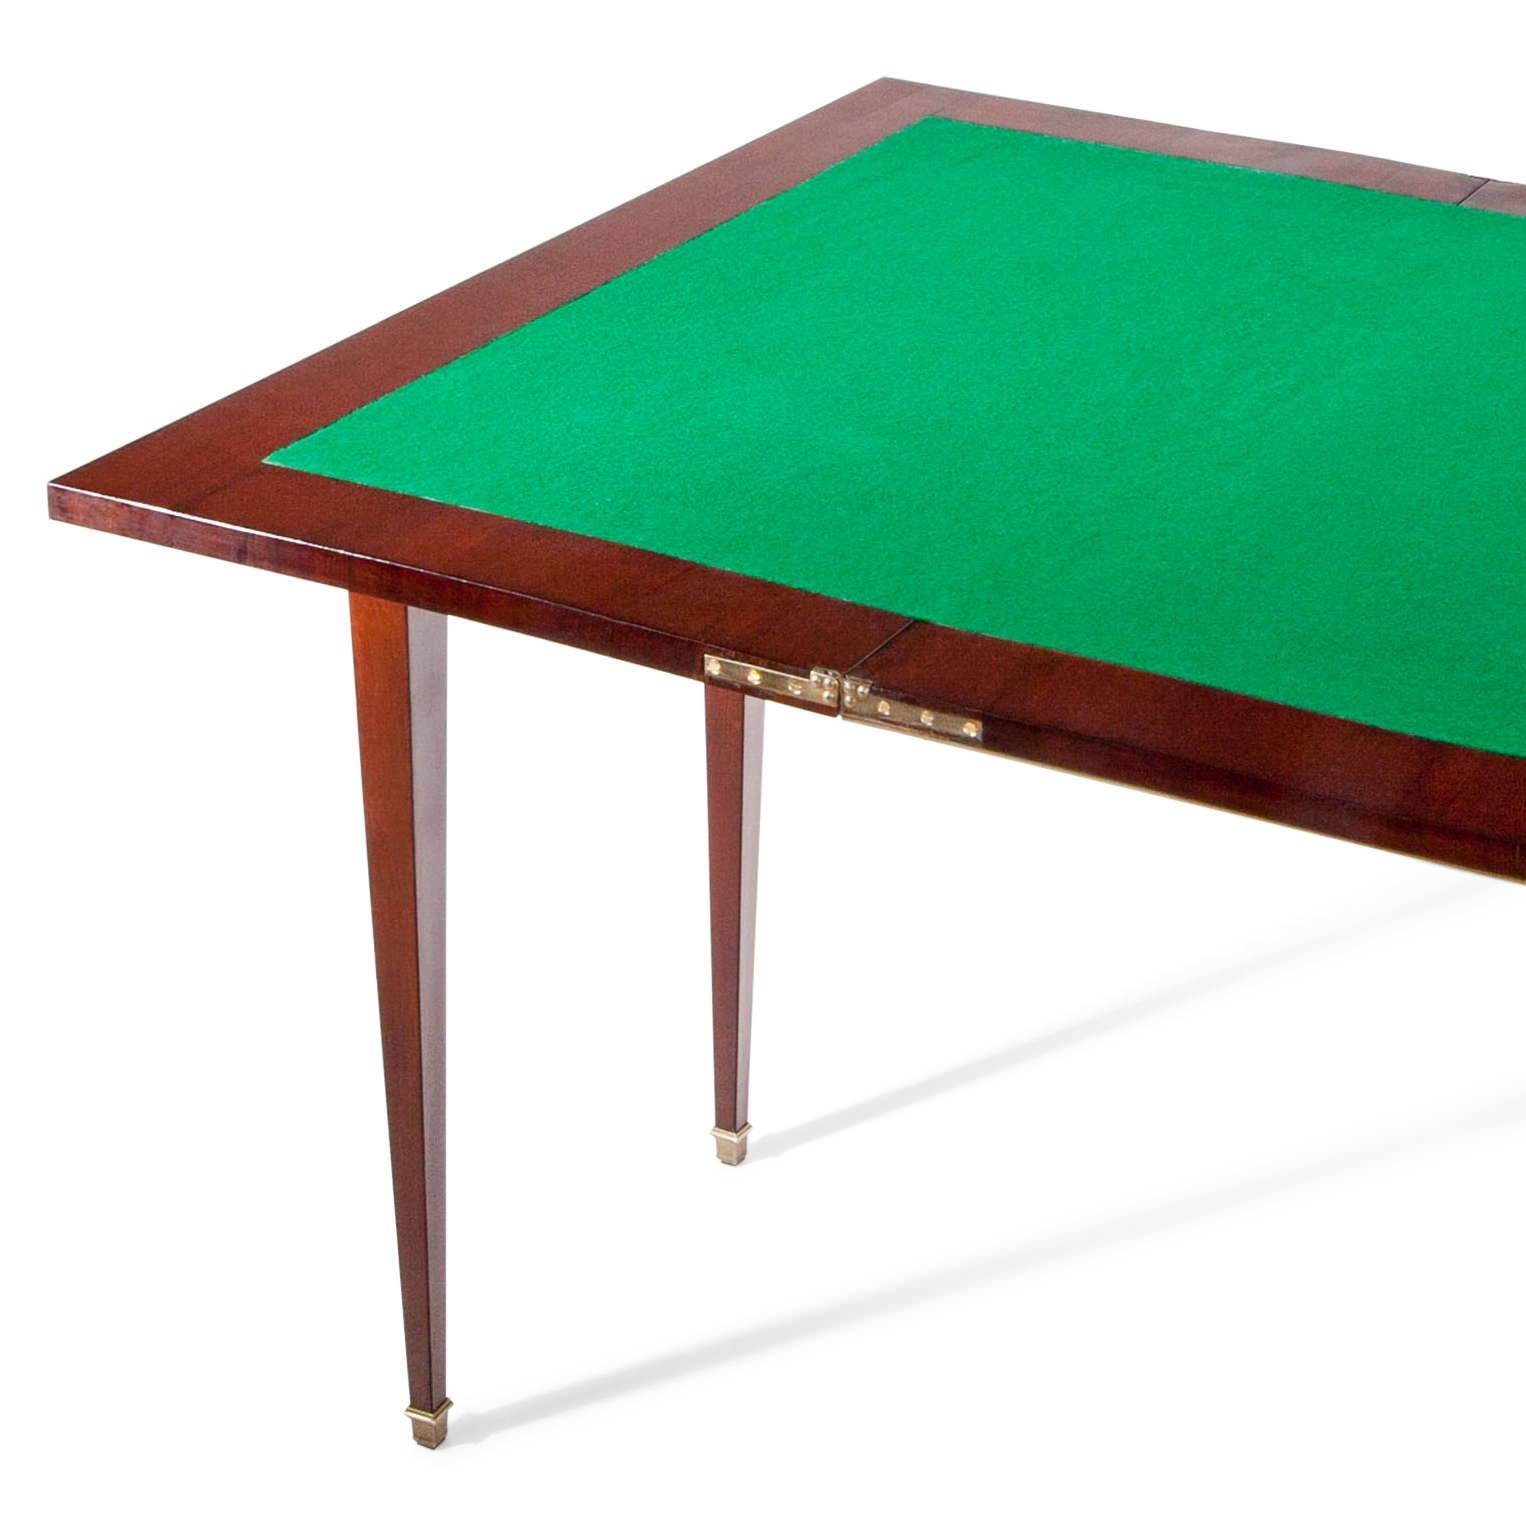 Mahogany gaming table standing on tapered feet with brass sabot. The fillings and the table edge are framed with brass moldings. The inner surface of the table is lined with green felt. Size folded out: 77 x 94 x 94 cm.